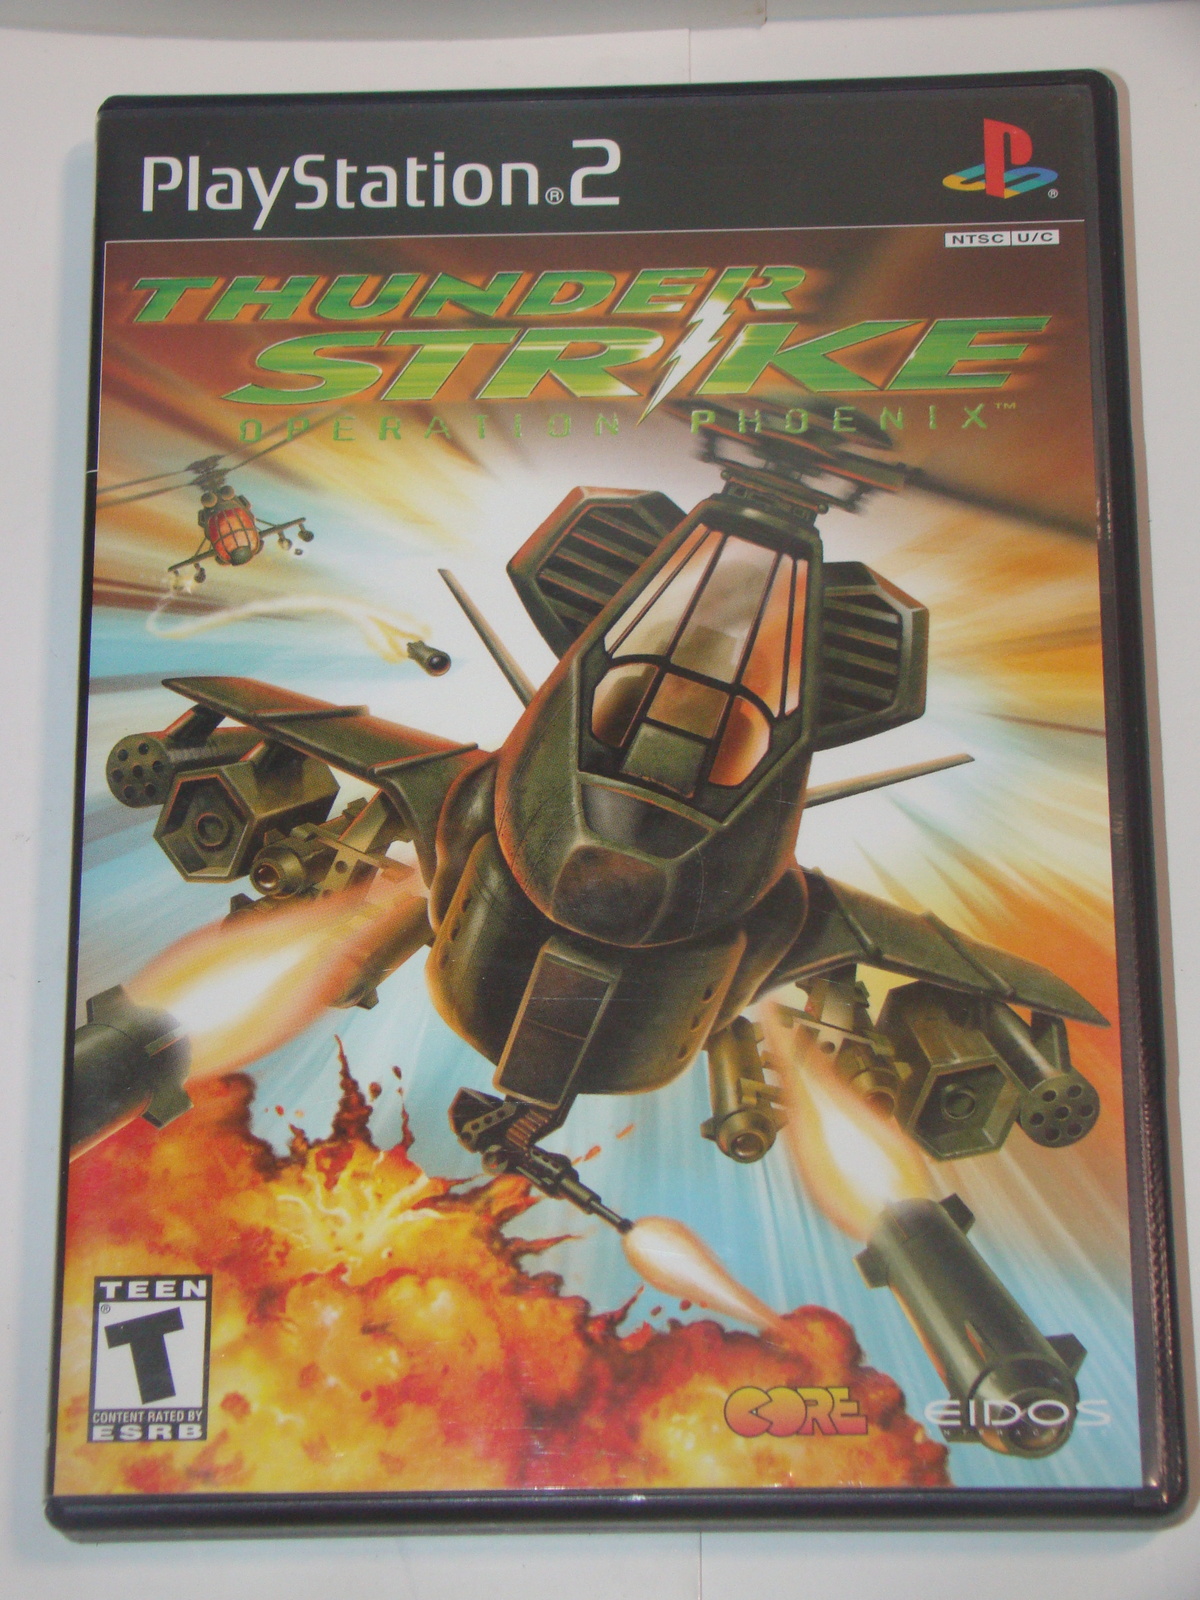 Primary image for Playstation 2 - THUNDER STRIKE - OPERATION PHOENIX (Complete with Manual)